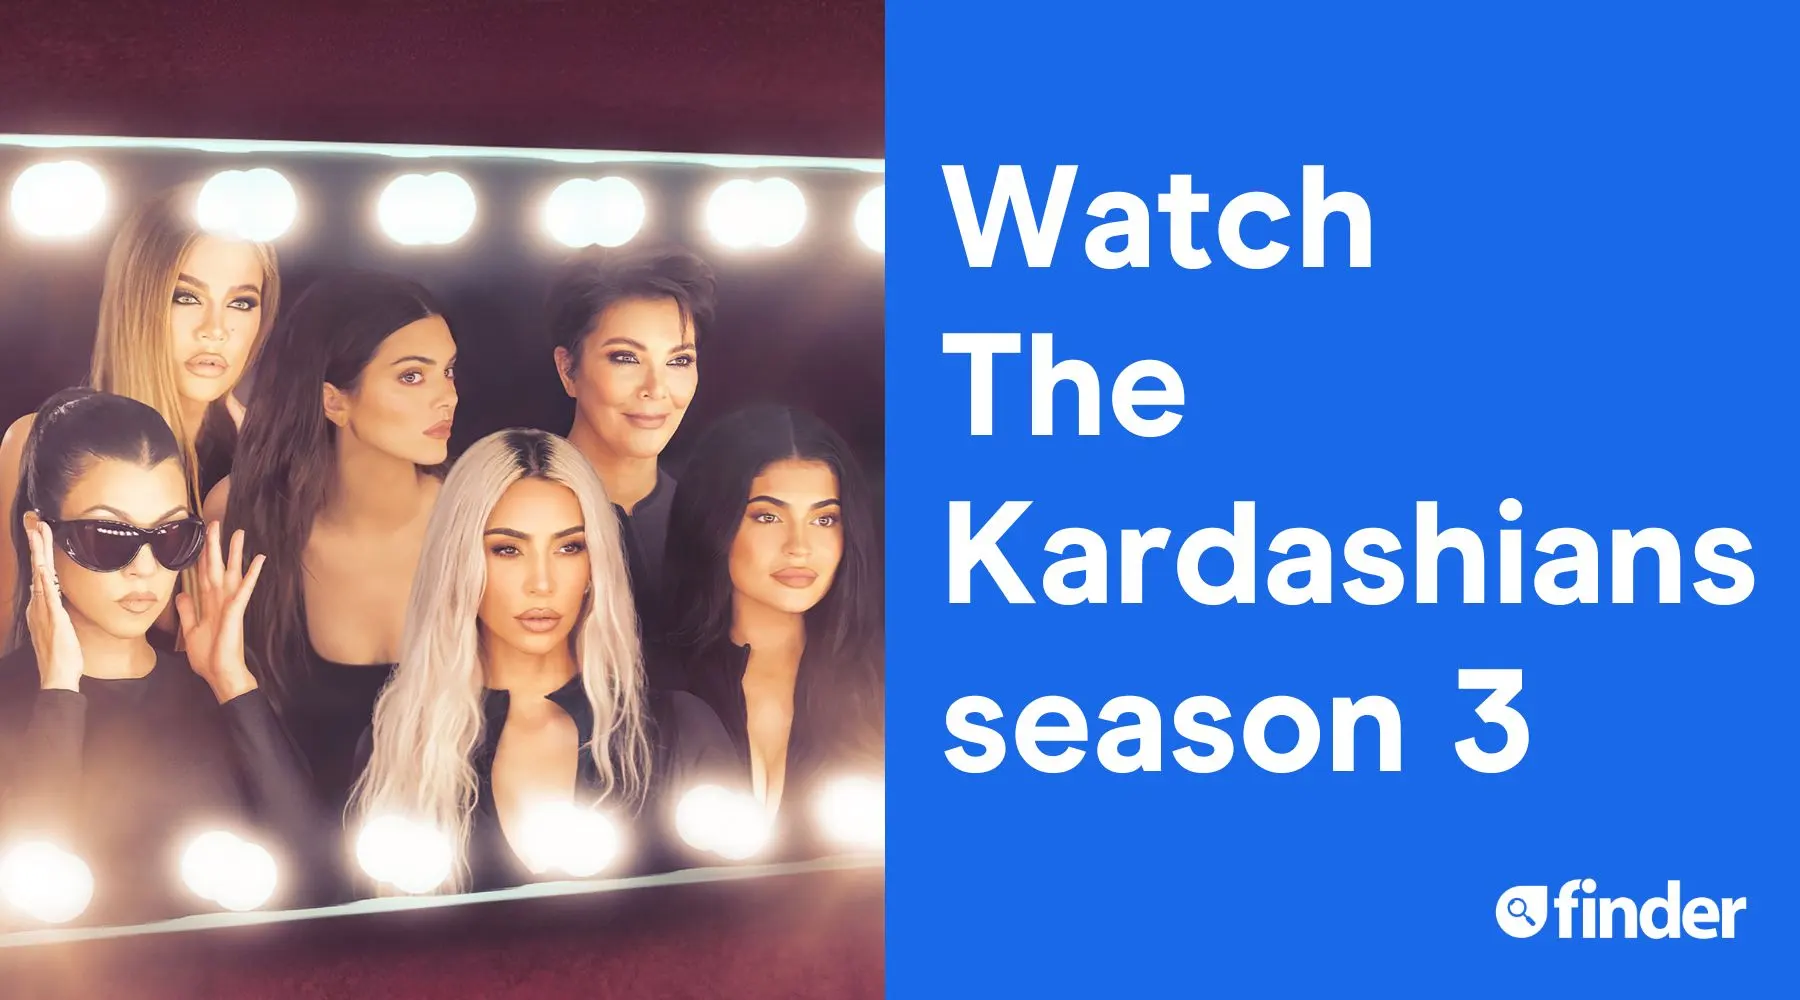 The Kardashians season 3 Preview, schedule and stream options Finder